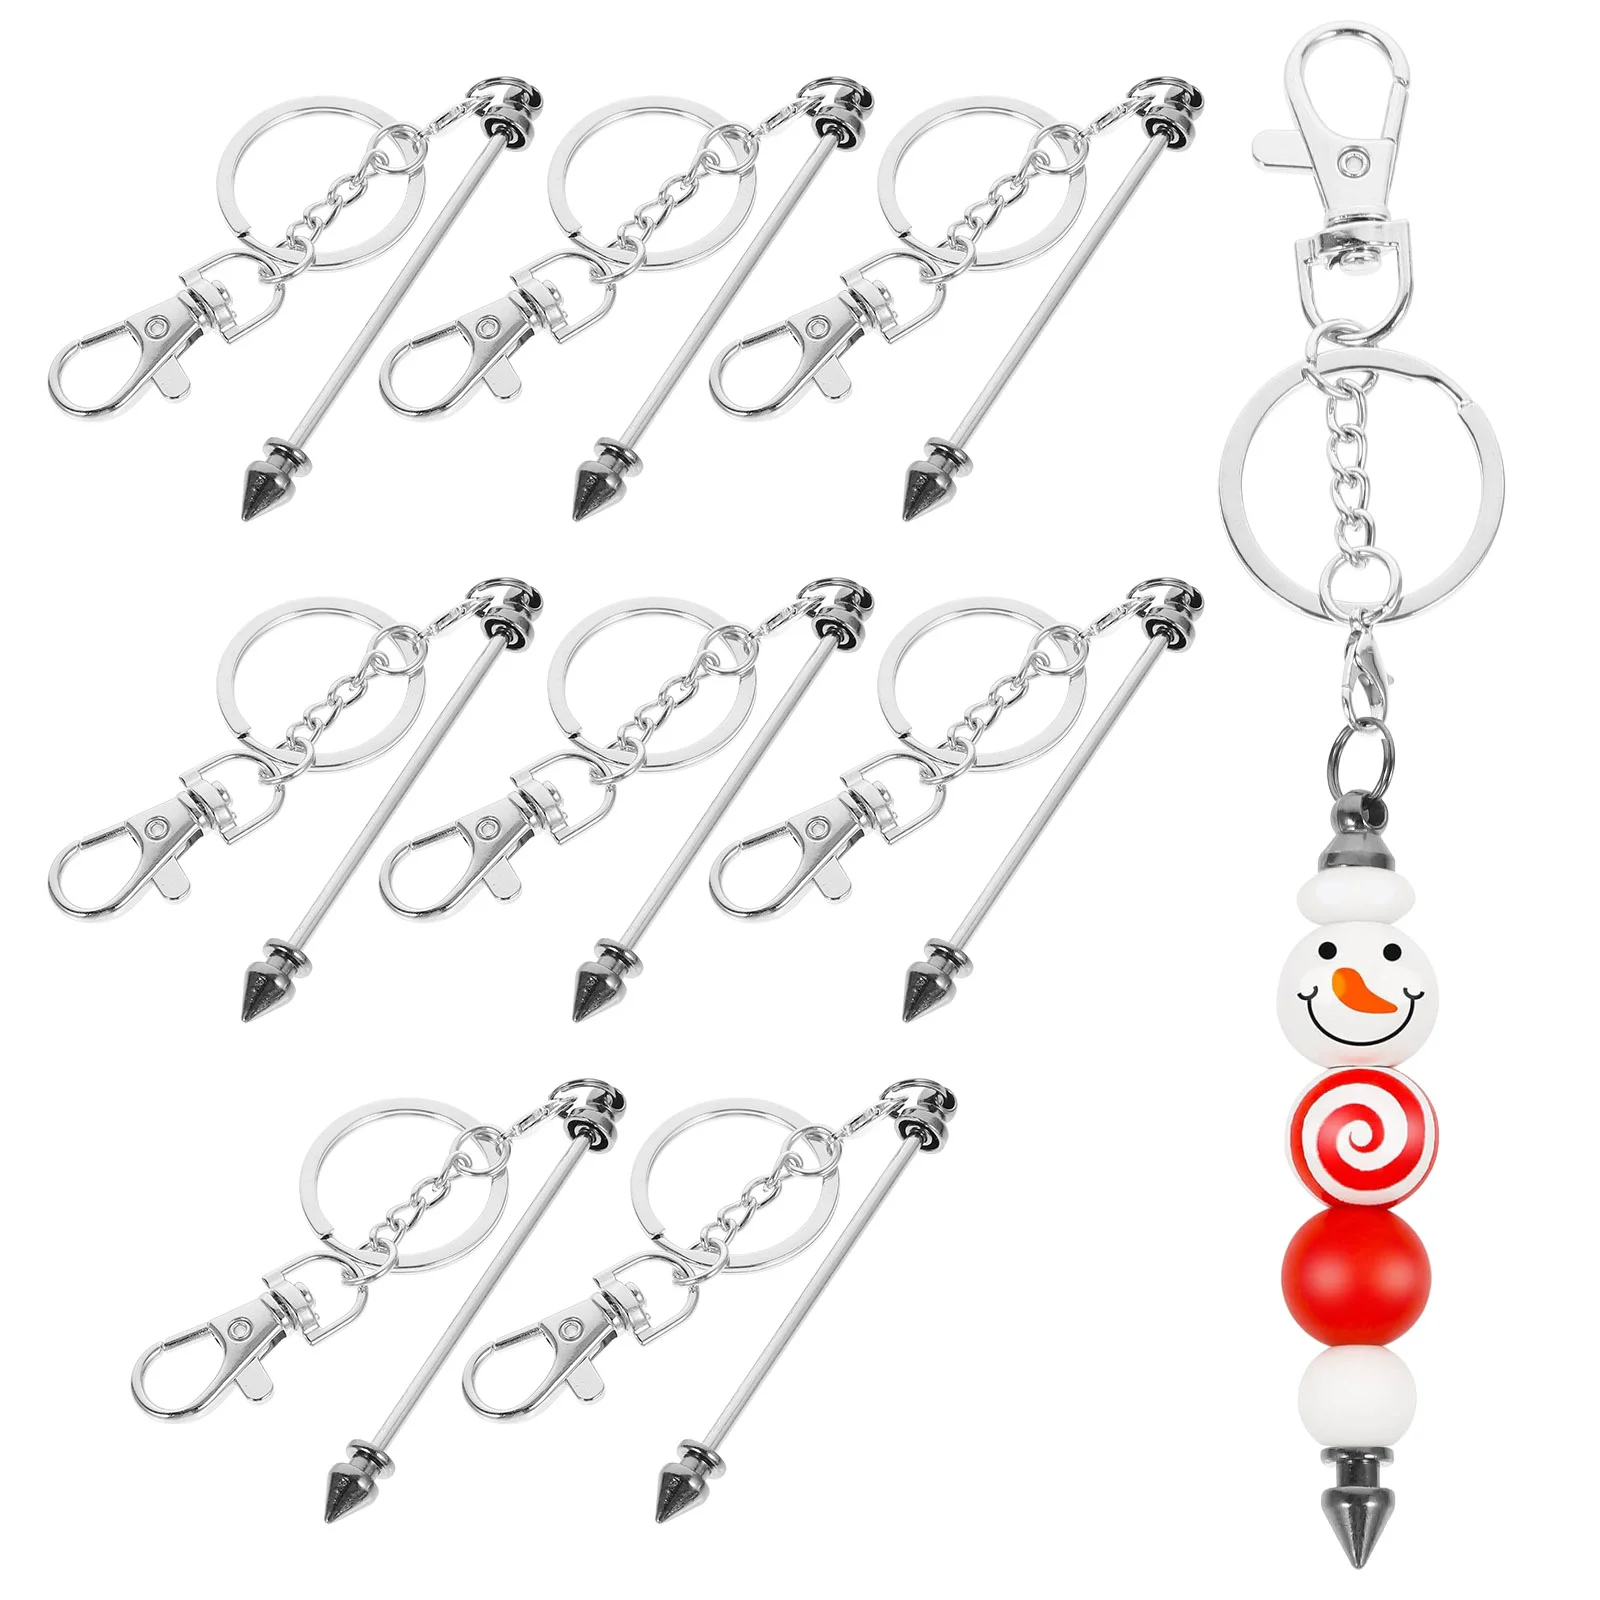 

8 Pcs Beaded Keychain Fob Keychian DIY Beading The Beadable Rings Metal Crafting Keychains Reusable